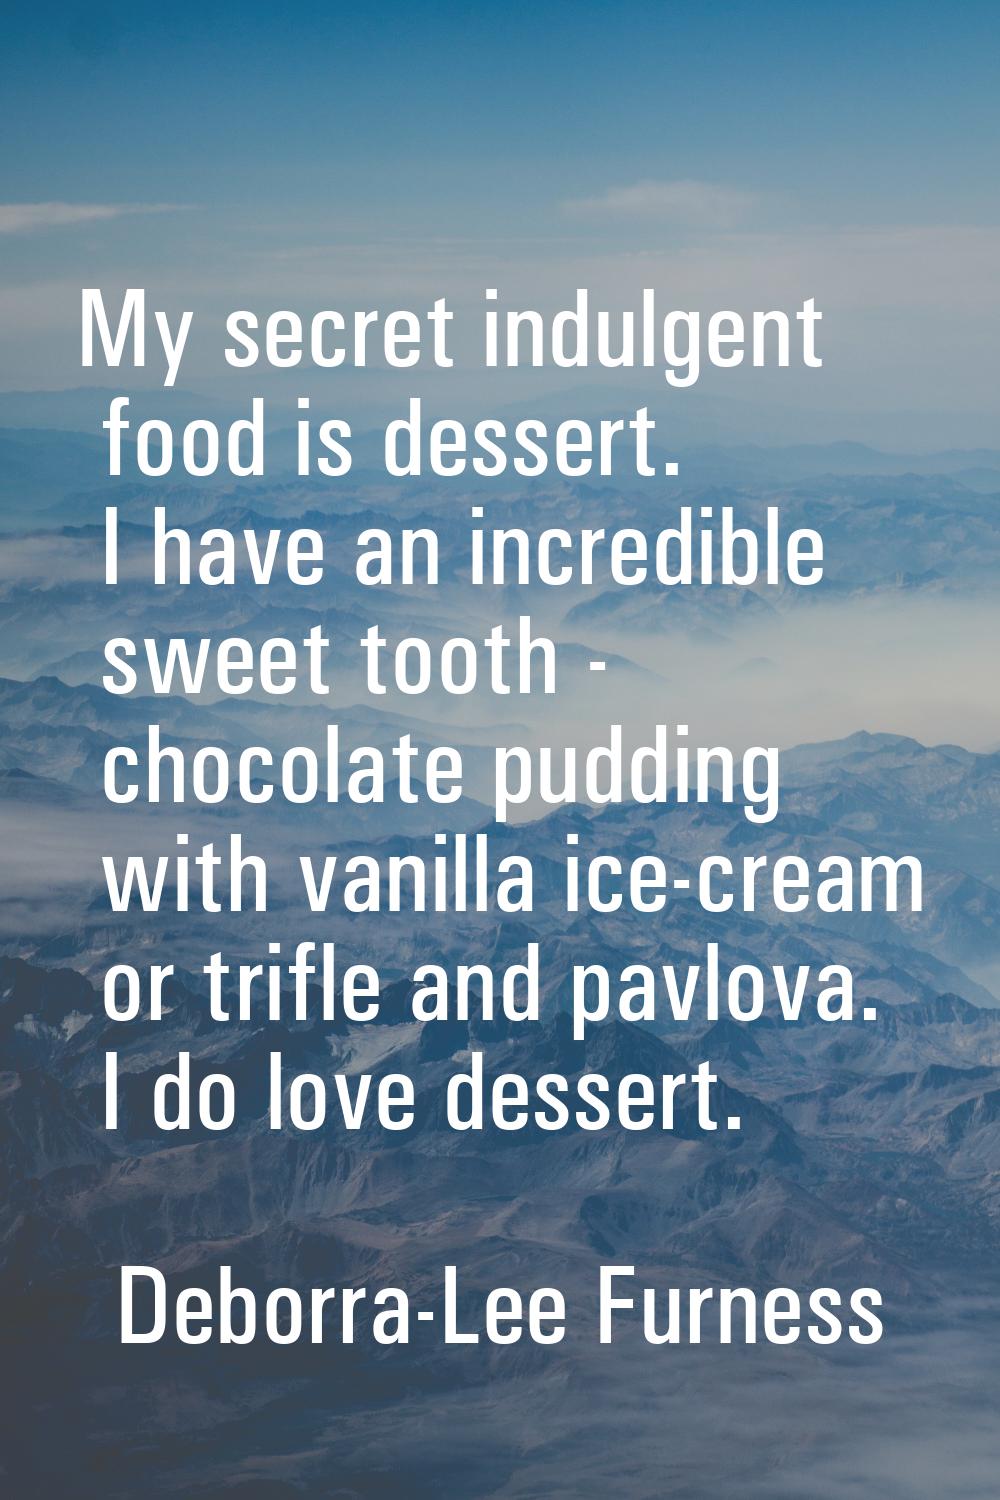 My secret indulgent food is dessert. I have an incredible sweet tooth - chocolate pudding with vani